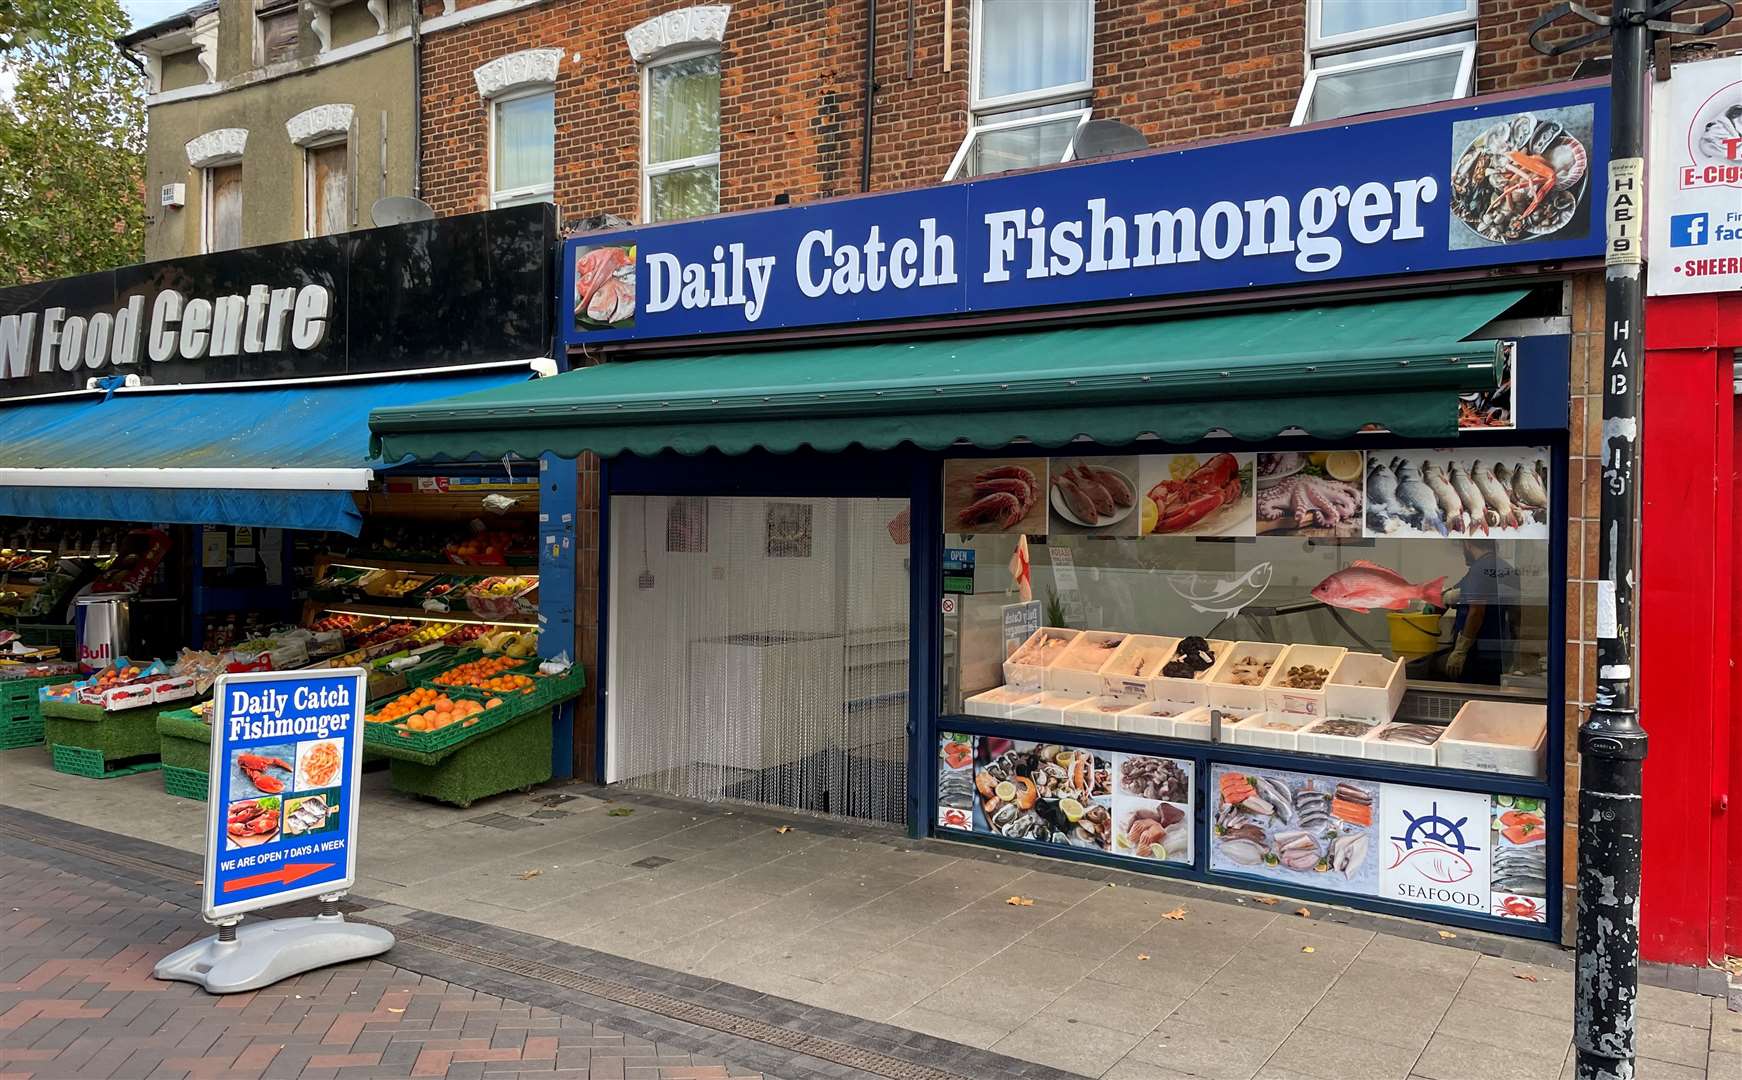 Daily Catch Fishmongers in Gillingham